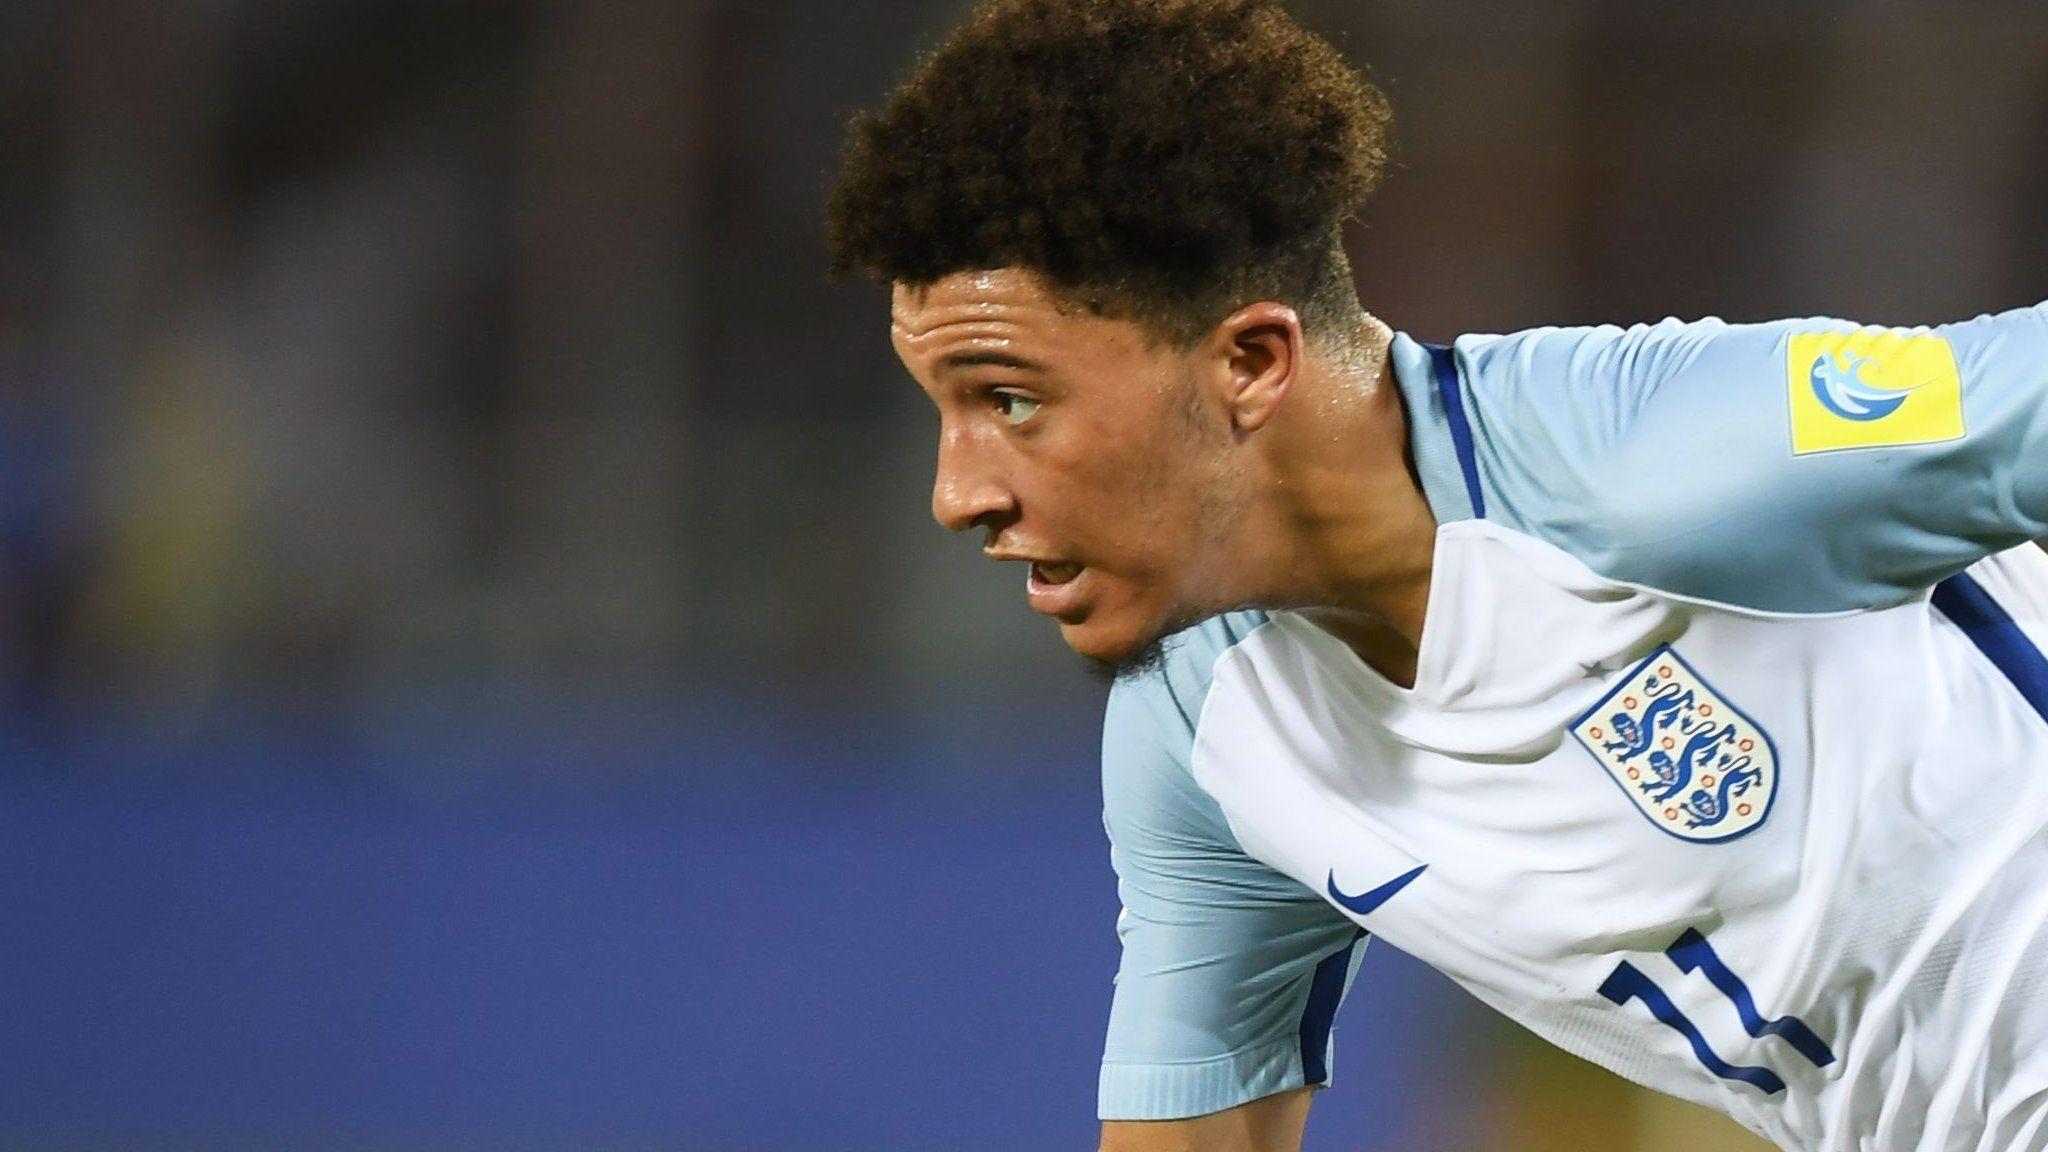 Under 17 World Cup: England's Jadon Sancho Called Back By Borussia